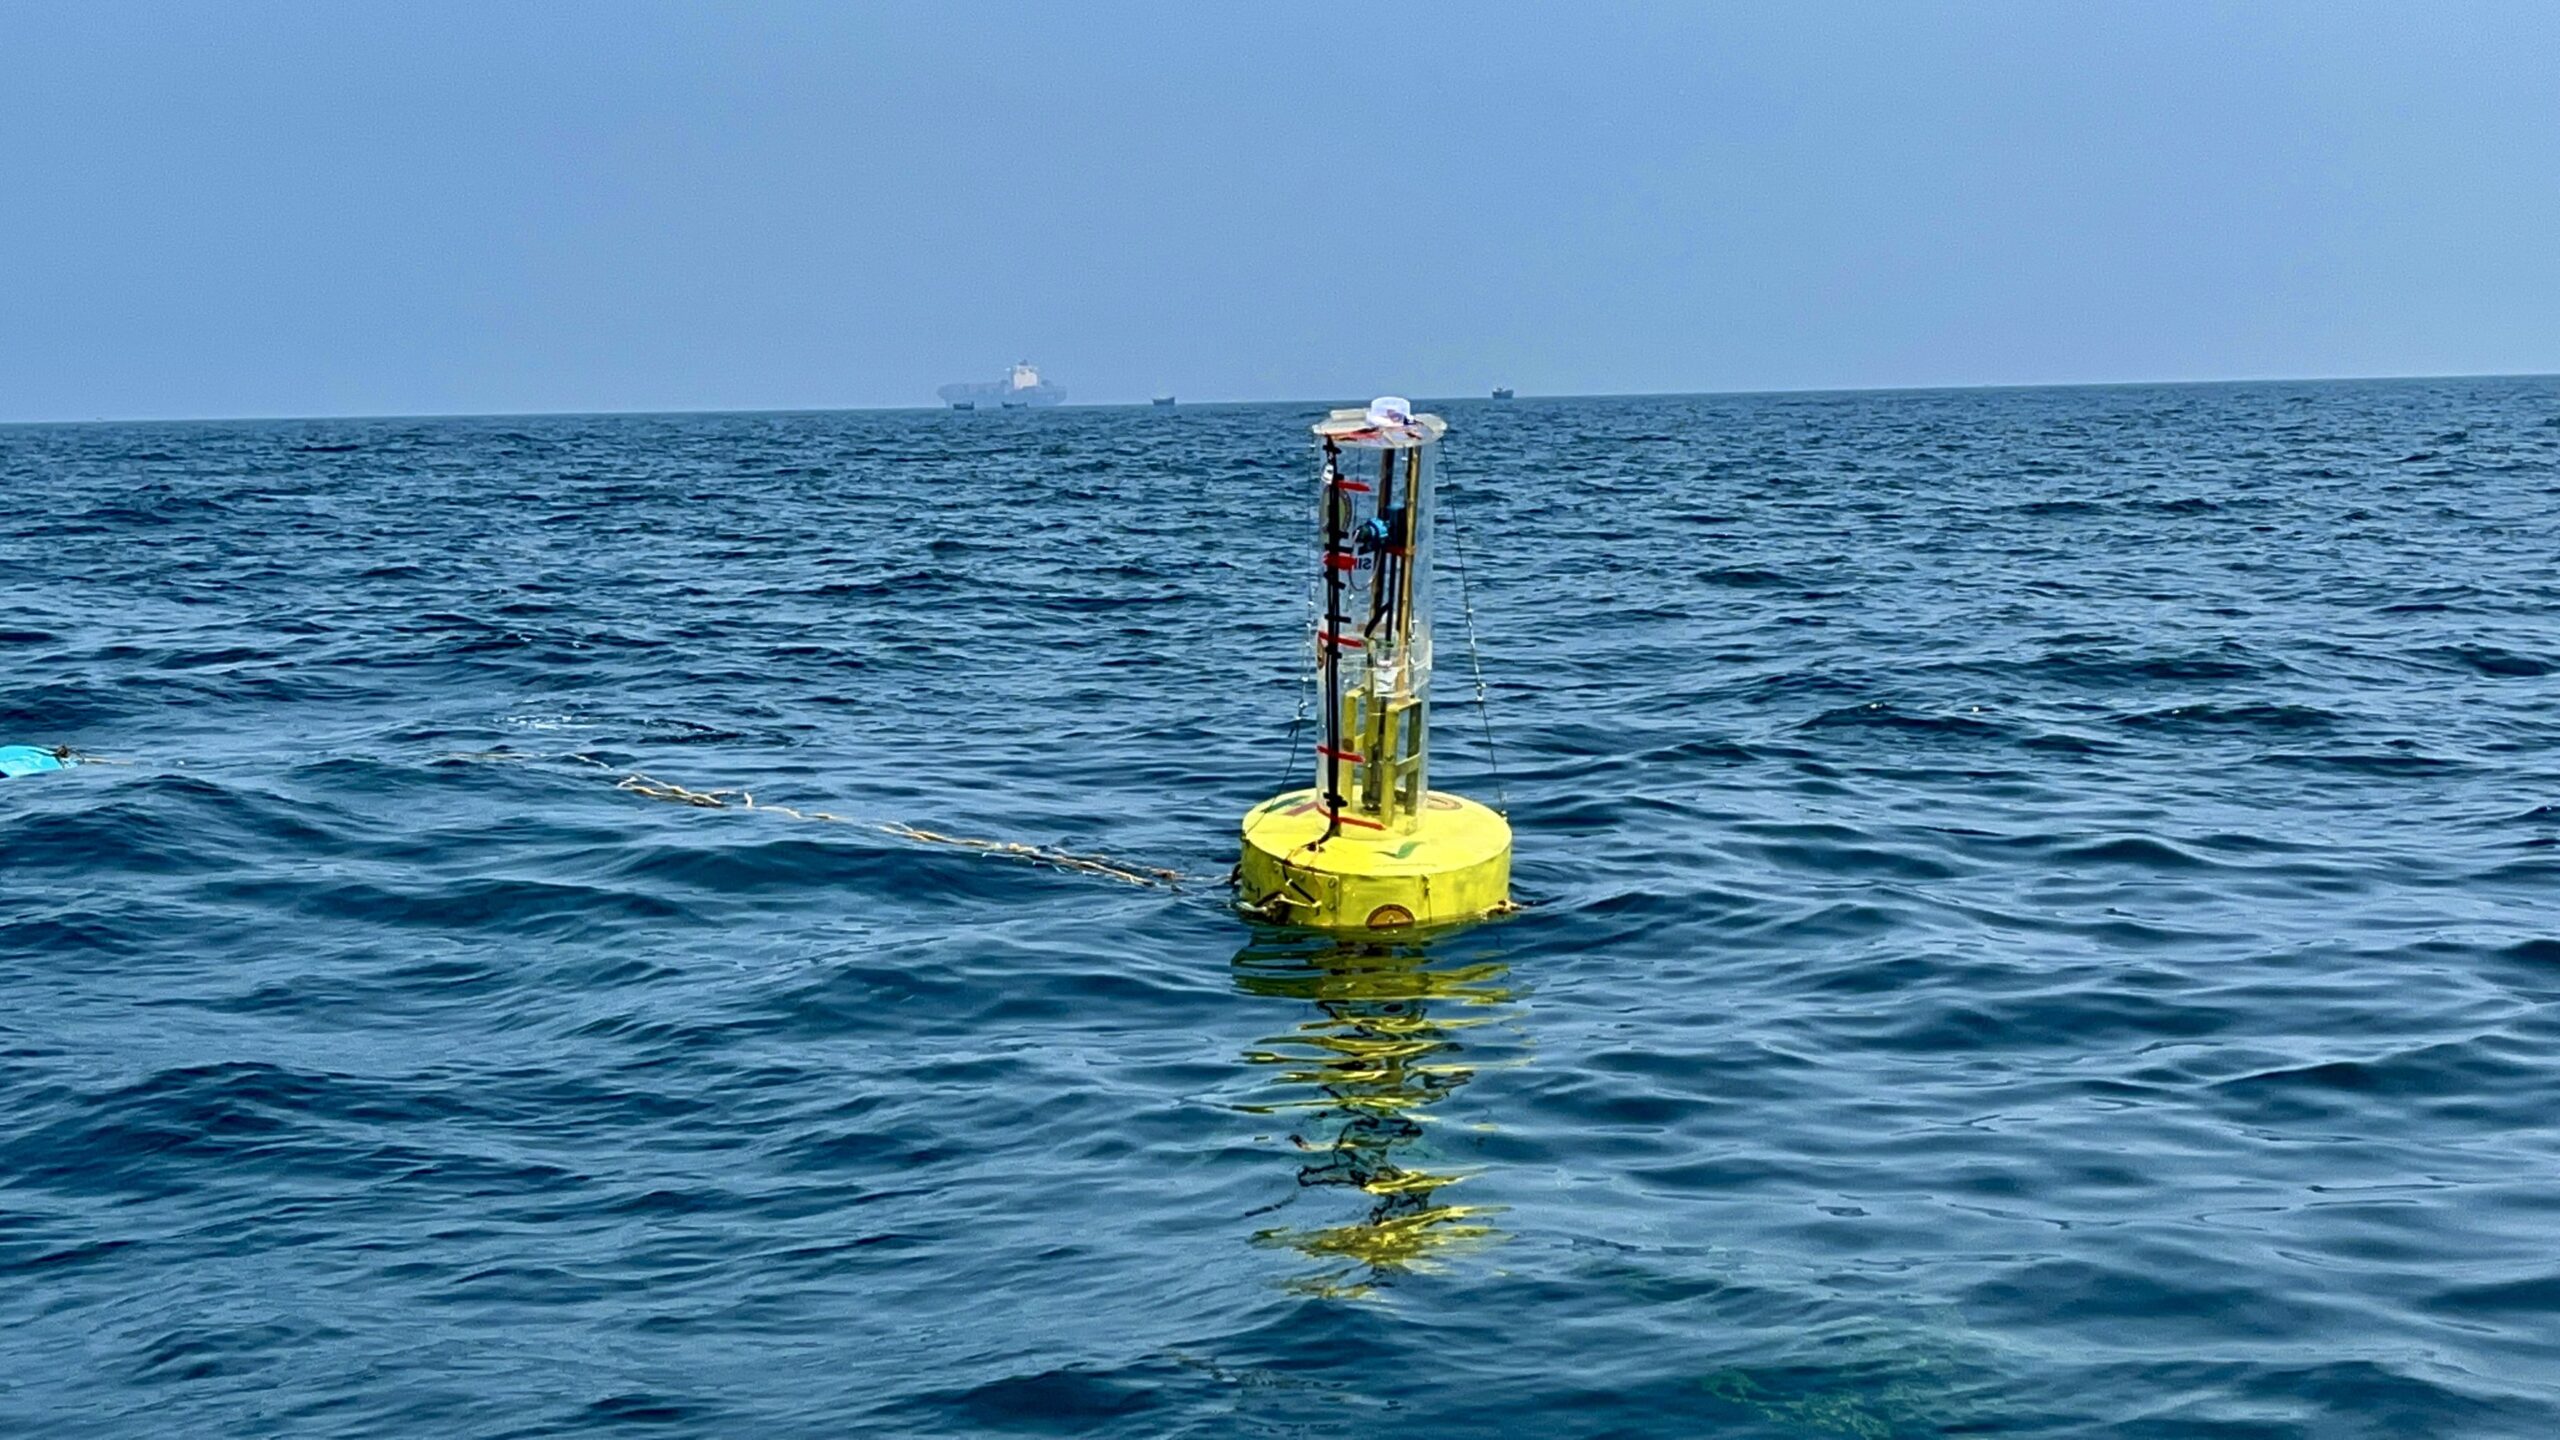 Iit Madras Researchers Develop And Deploy An Ocean Wave Energy Converter To Generate Electricity 5359